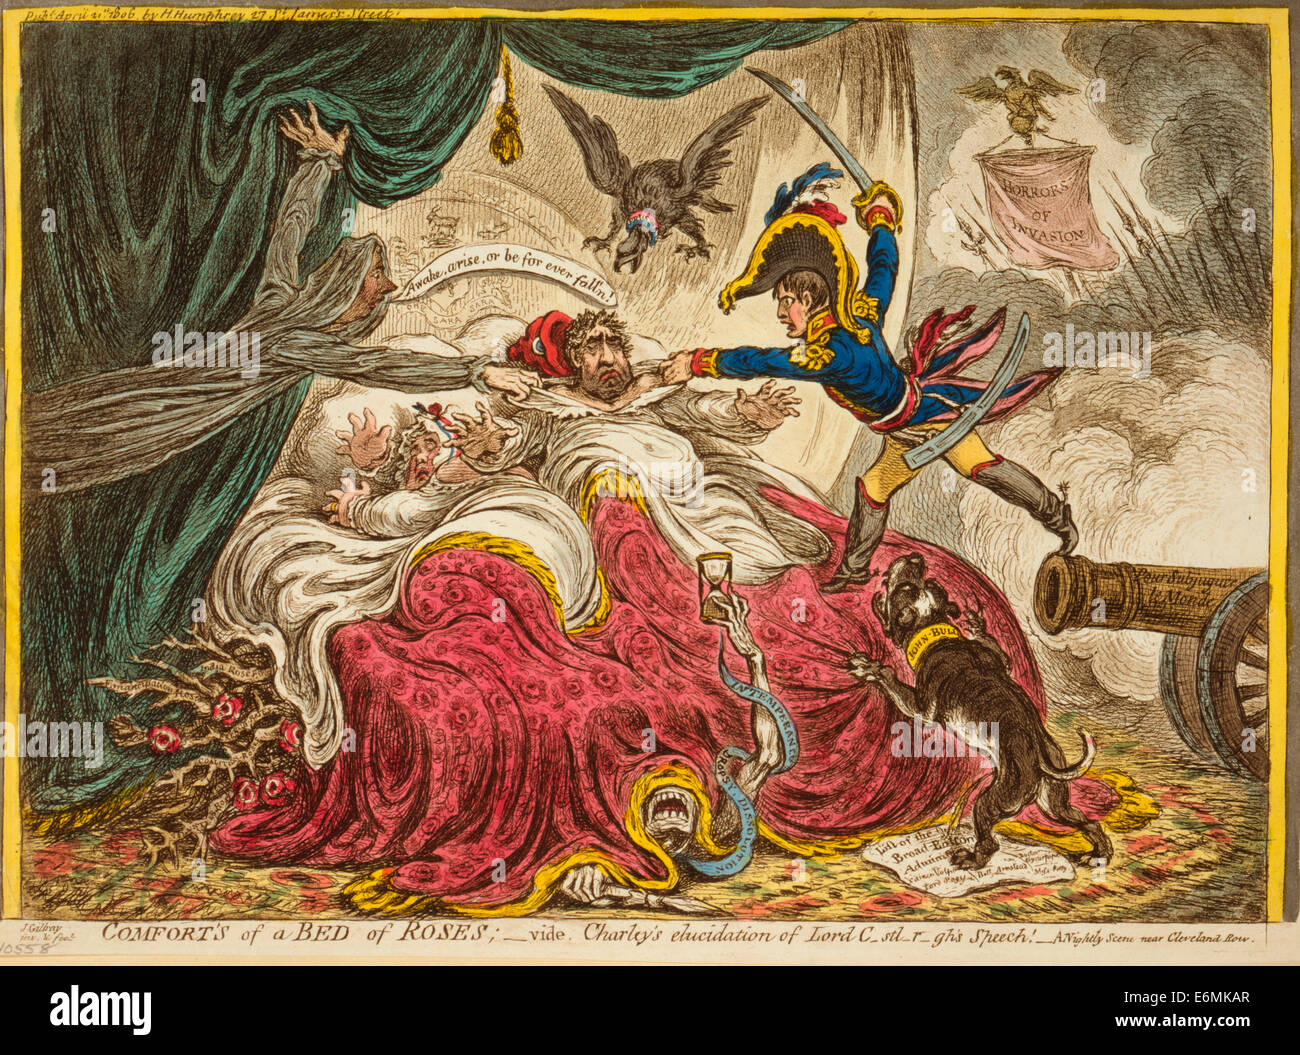 Comfort of a bed or Roses - Charles Fox, in bed with his wife, having a nightmare. To the right, Napoleon jumps to the bed from a cannon with the words 'Pour subjugeur le Monde' inscribed on the muzzle; behind him are seen pikes and a banner with the words 'Horrors of Invasion.' William Pitt, as a shade, floats near the bed, admonishing Fox to awake. An eagle with the collar labeled 'Prussia' looms over Fox's head. From under the bed grow thorny rose branches and Death crawls out from under the covers. A bulldog with its collar inscribed 'John Bull' lunges at Napoleon. Political Cartoon 1806 Stock Photo